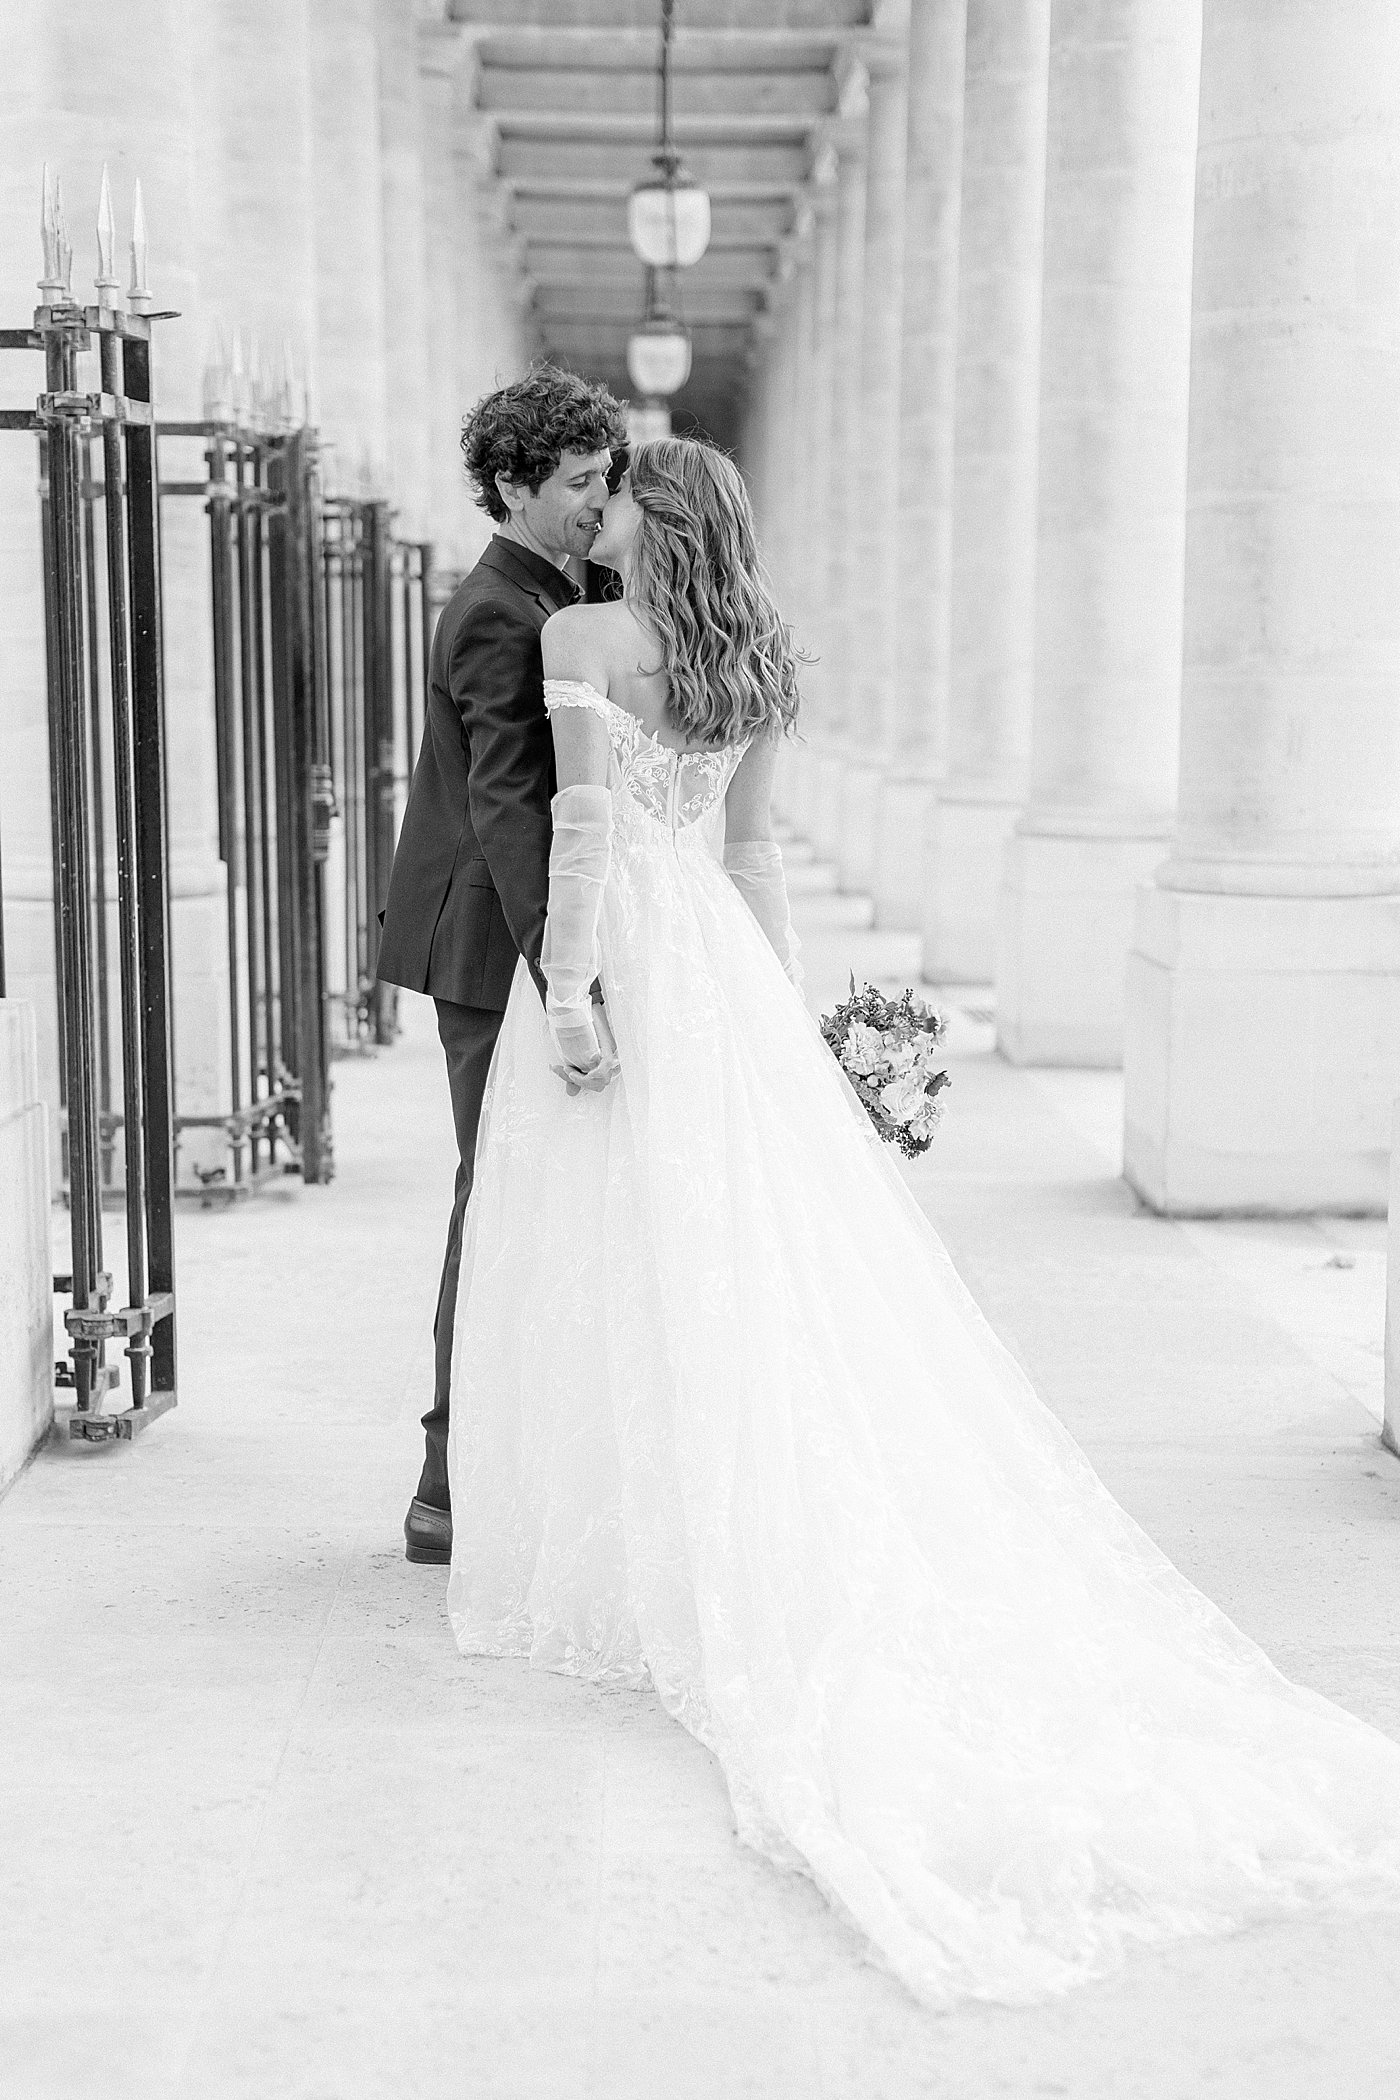 Black and white image of a bride and groom embracing and kissing in an outdoor, sunlit, concrete corridor | Image by Hope Helmuth Photography